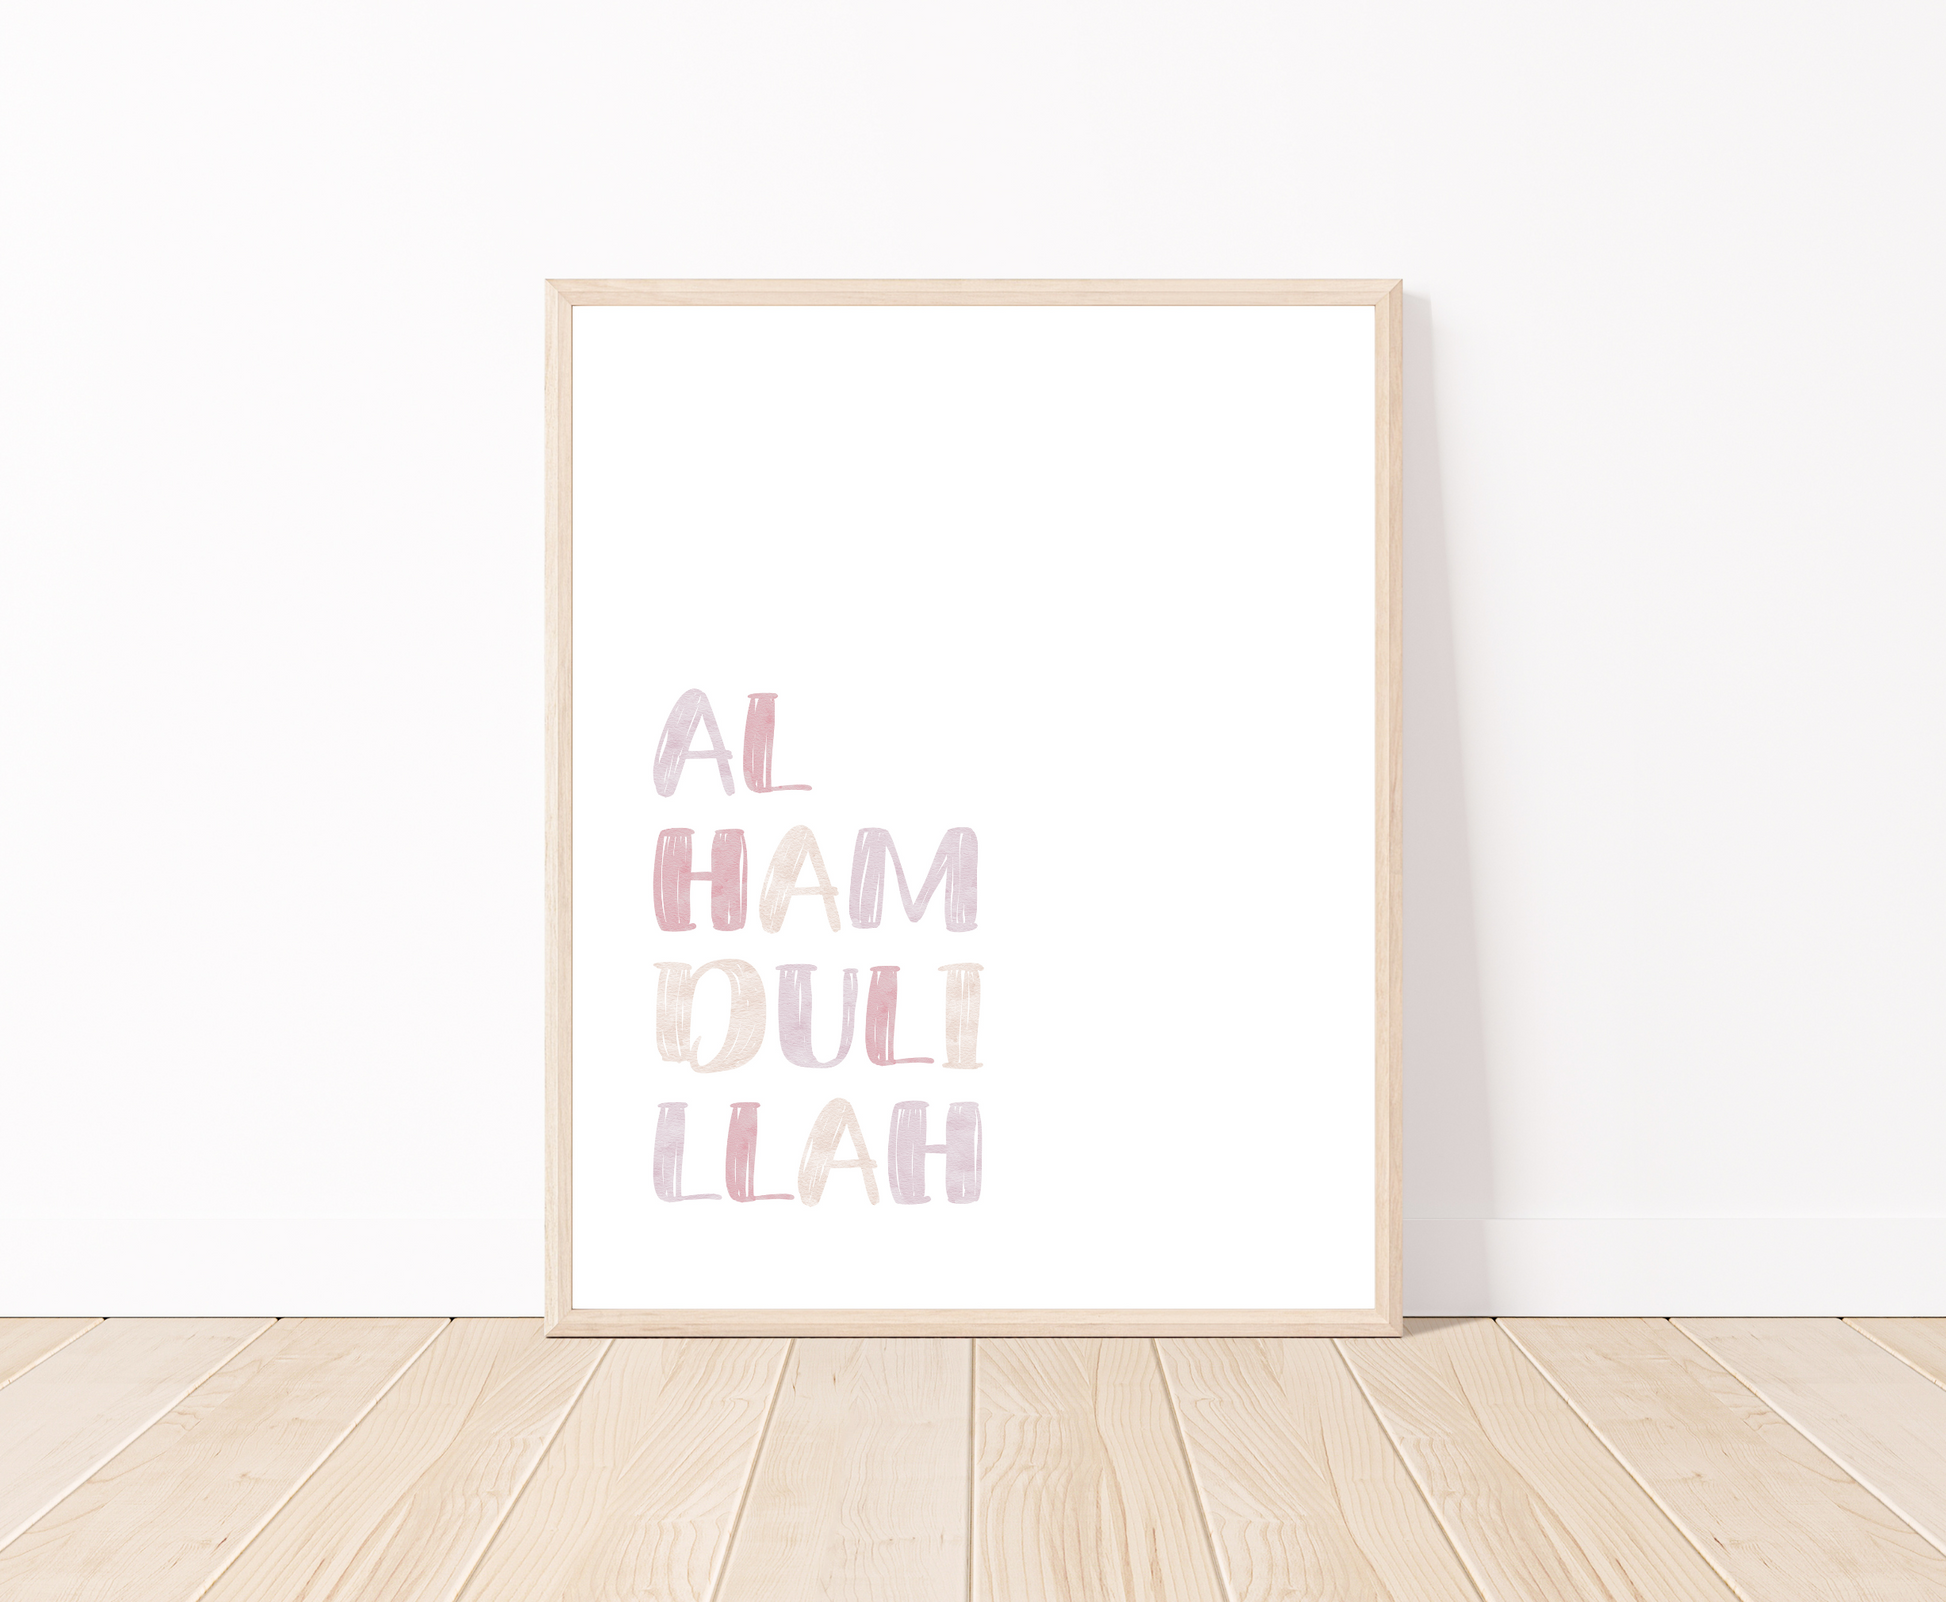 A little girl’s room digital print is placed on a white wall and parquet flooring. It includes “Alhamdulillah” written in upper case and multi-colored letters with a white background.